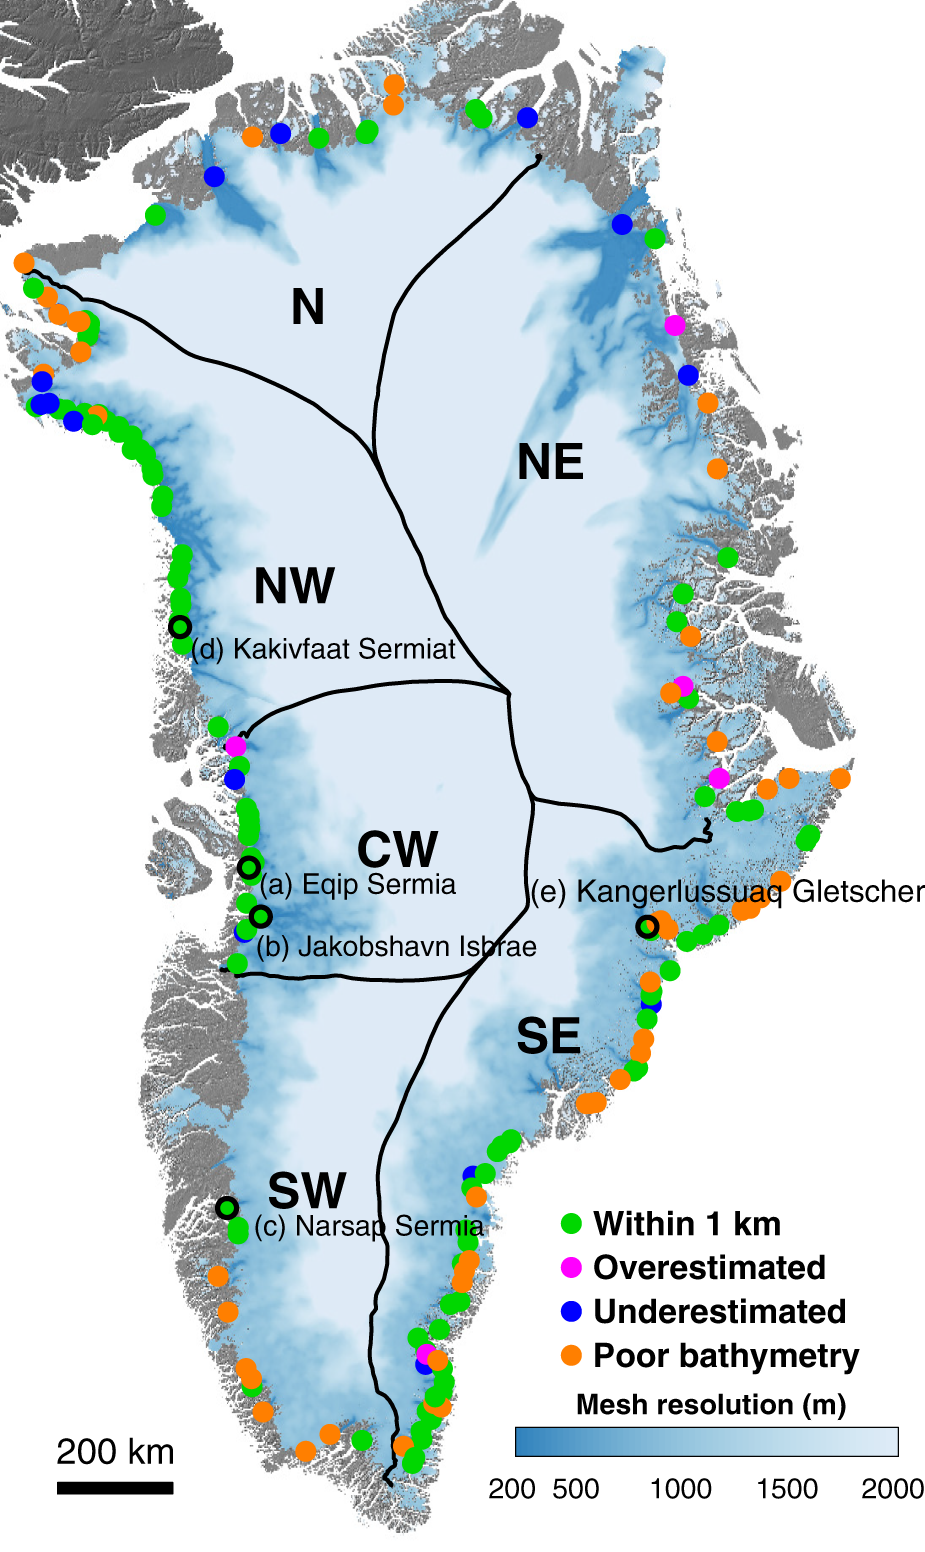 Greenland ice flow likely to speed up